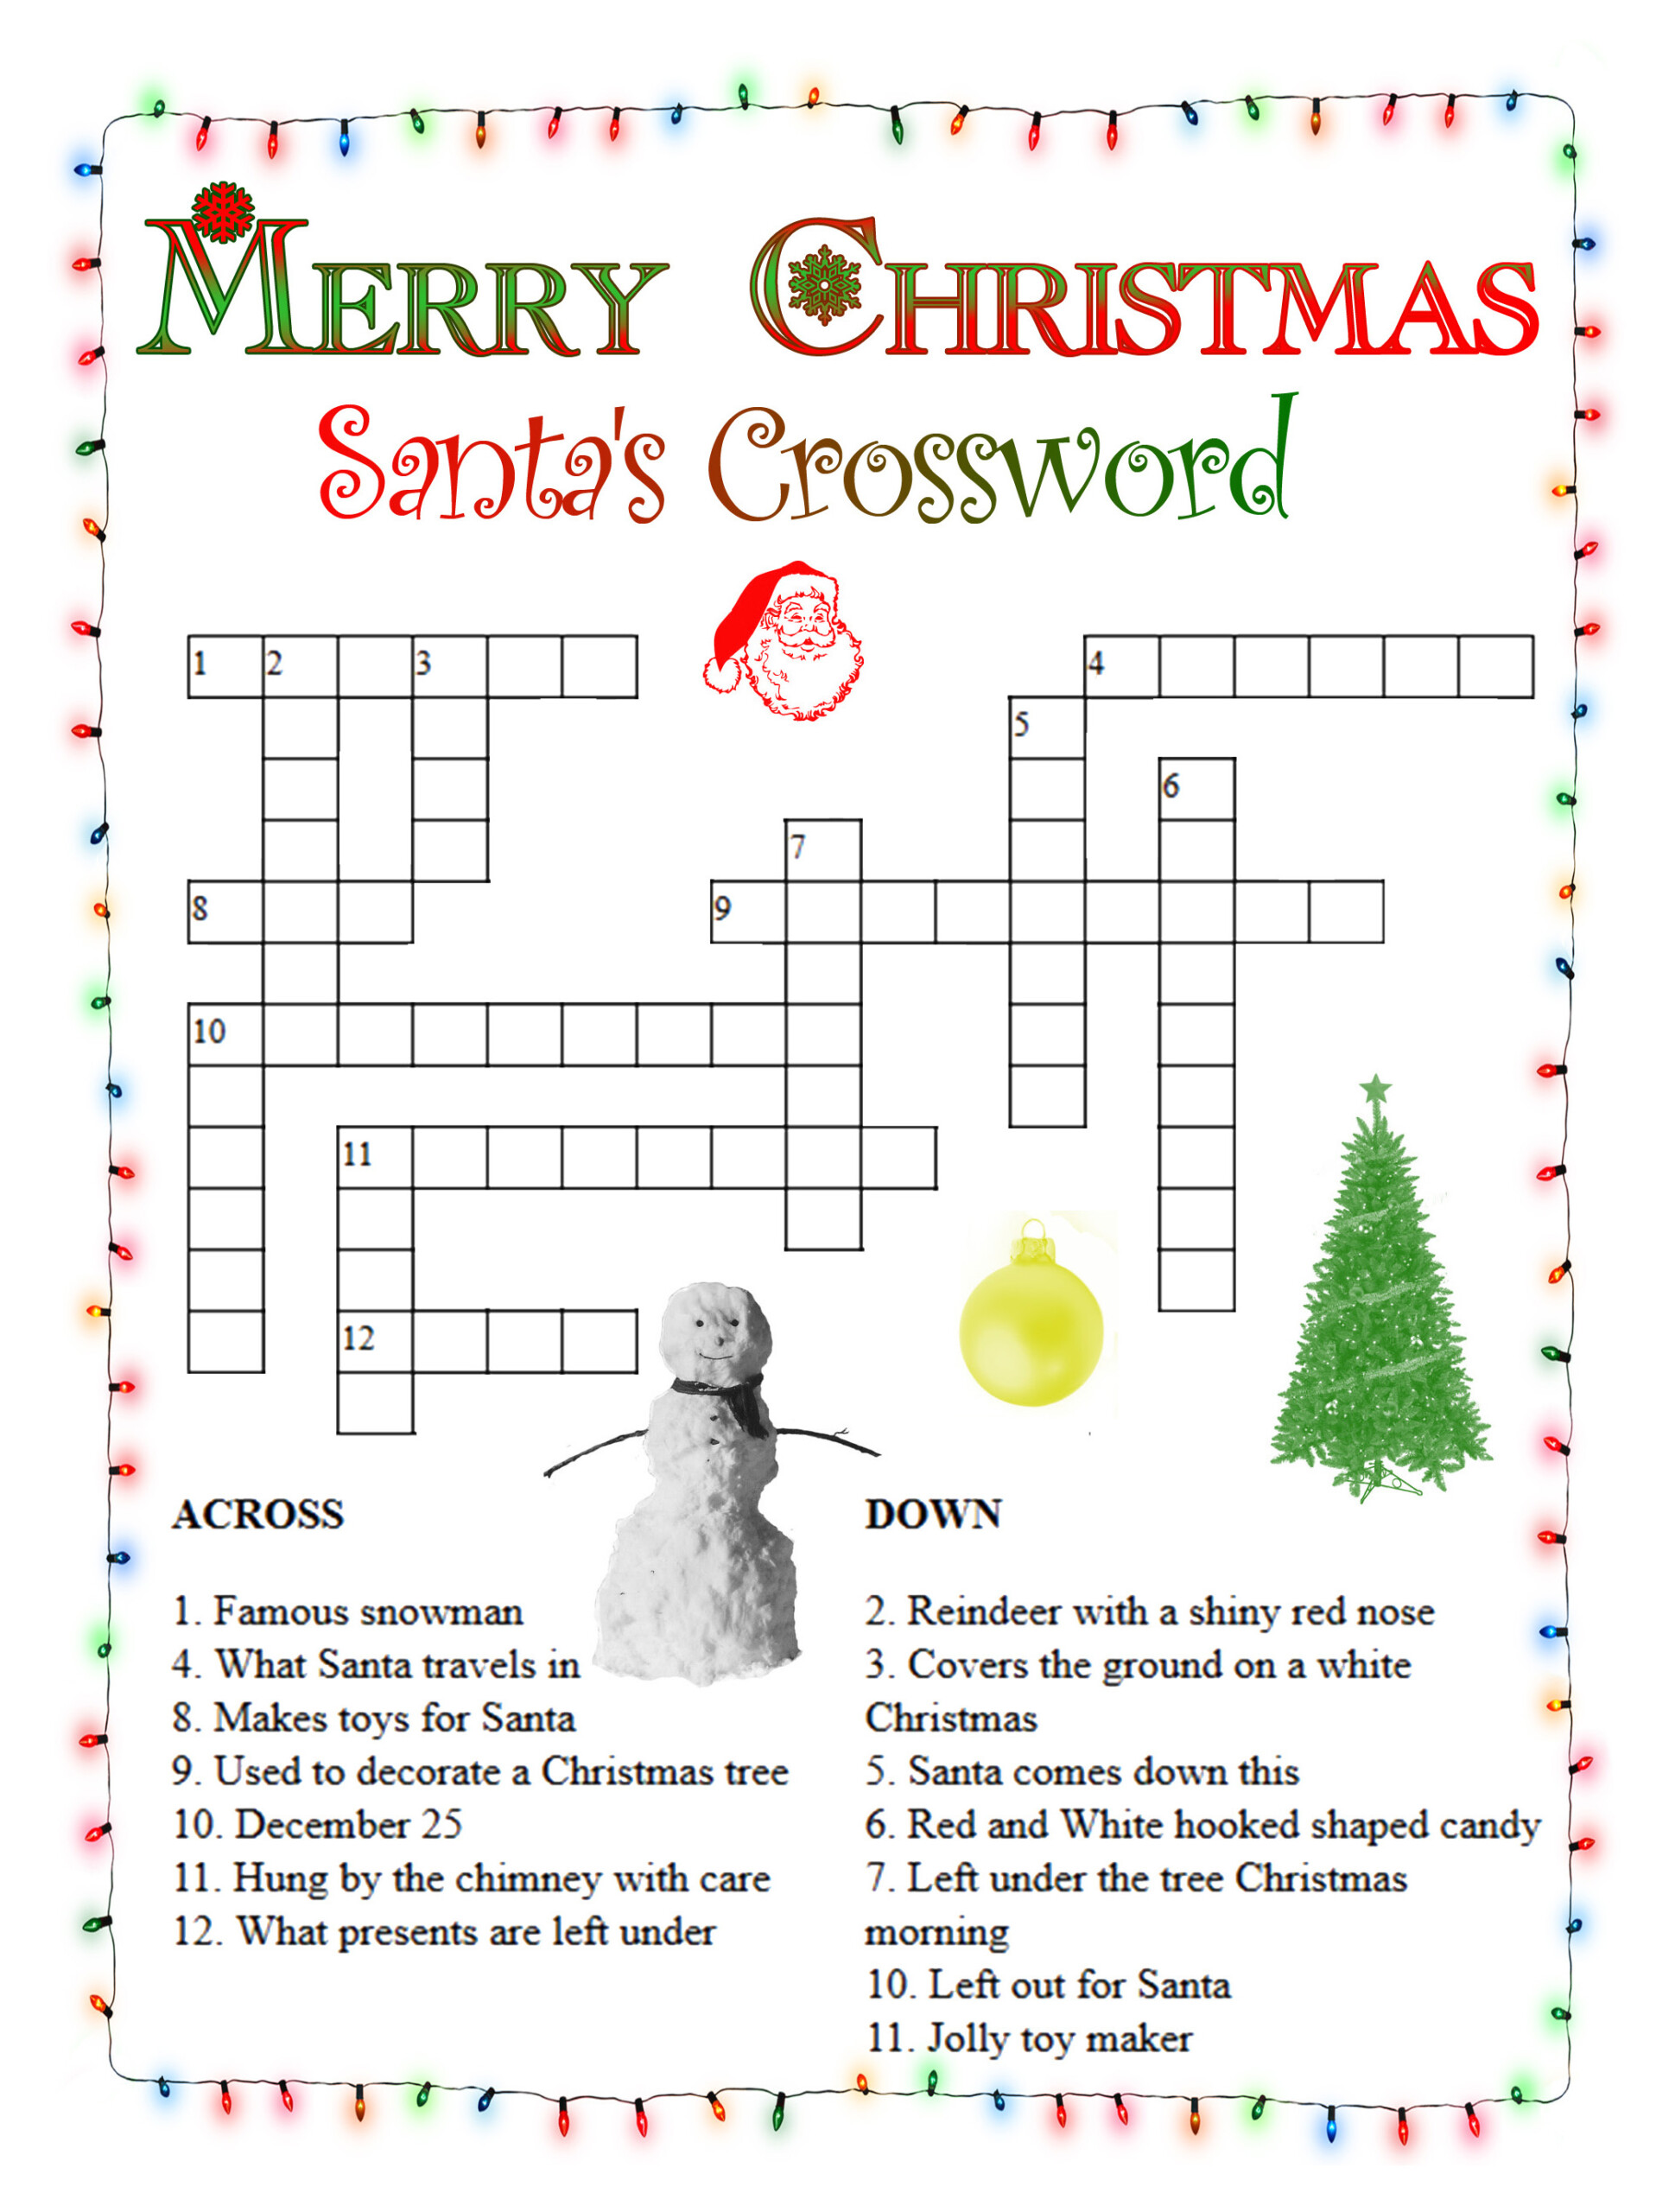 Holiday Crossword Puzzles Printable - Christmas Easy Crossword